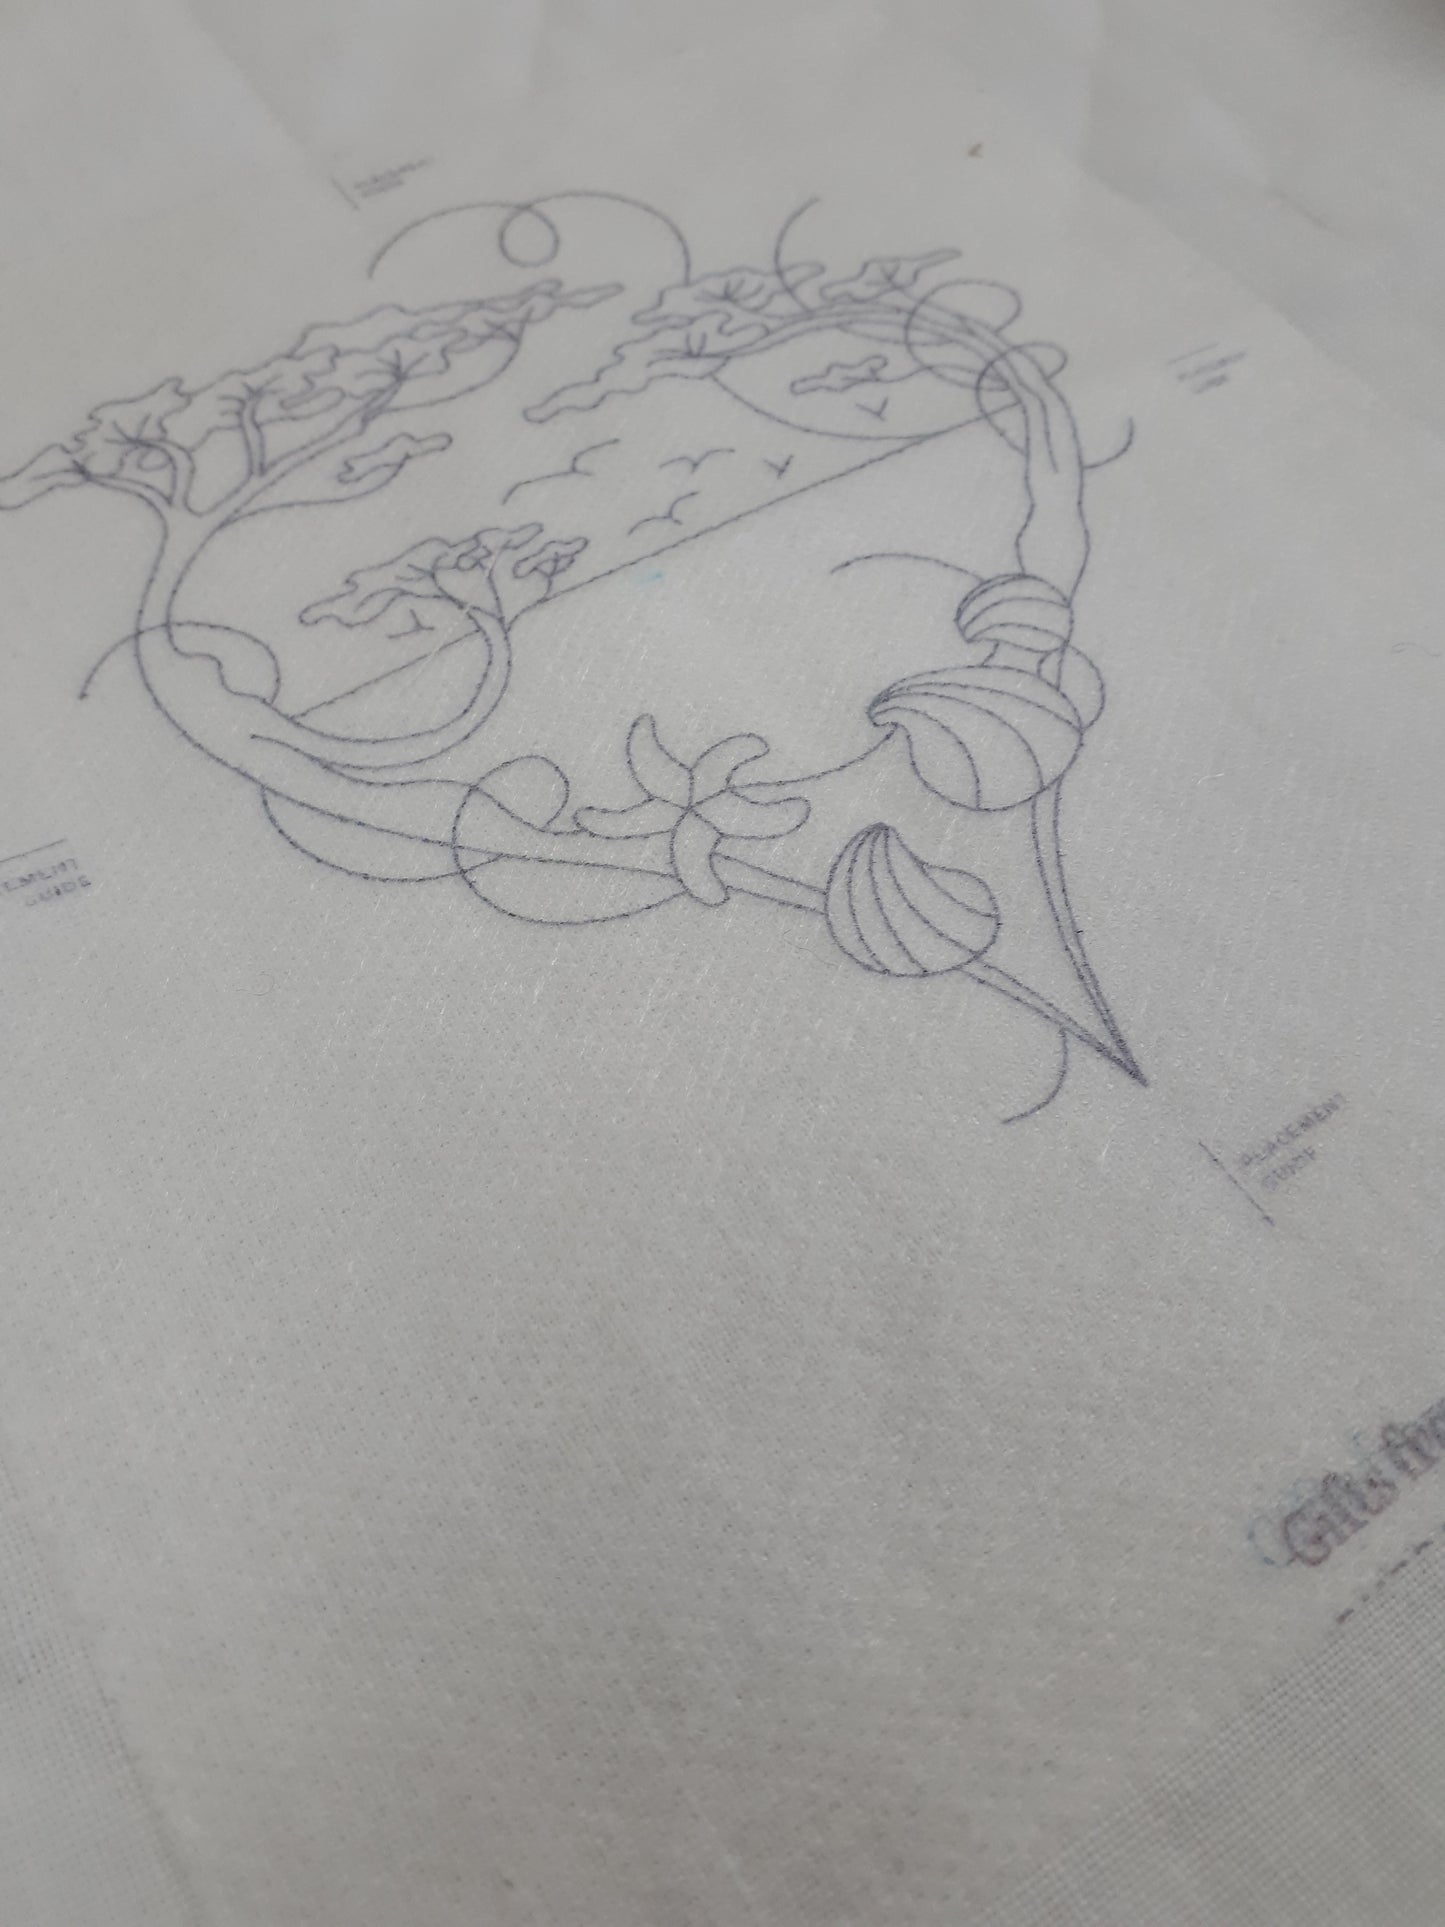 Magic Paper embroidery transfer